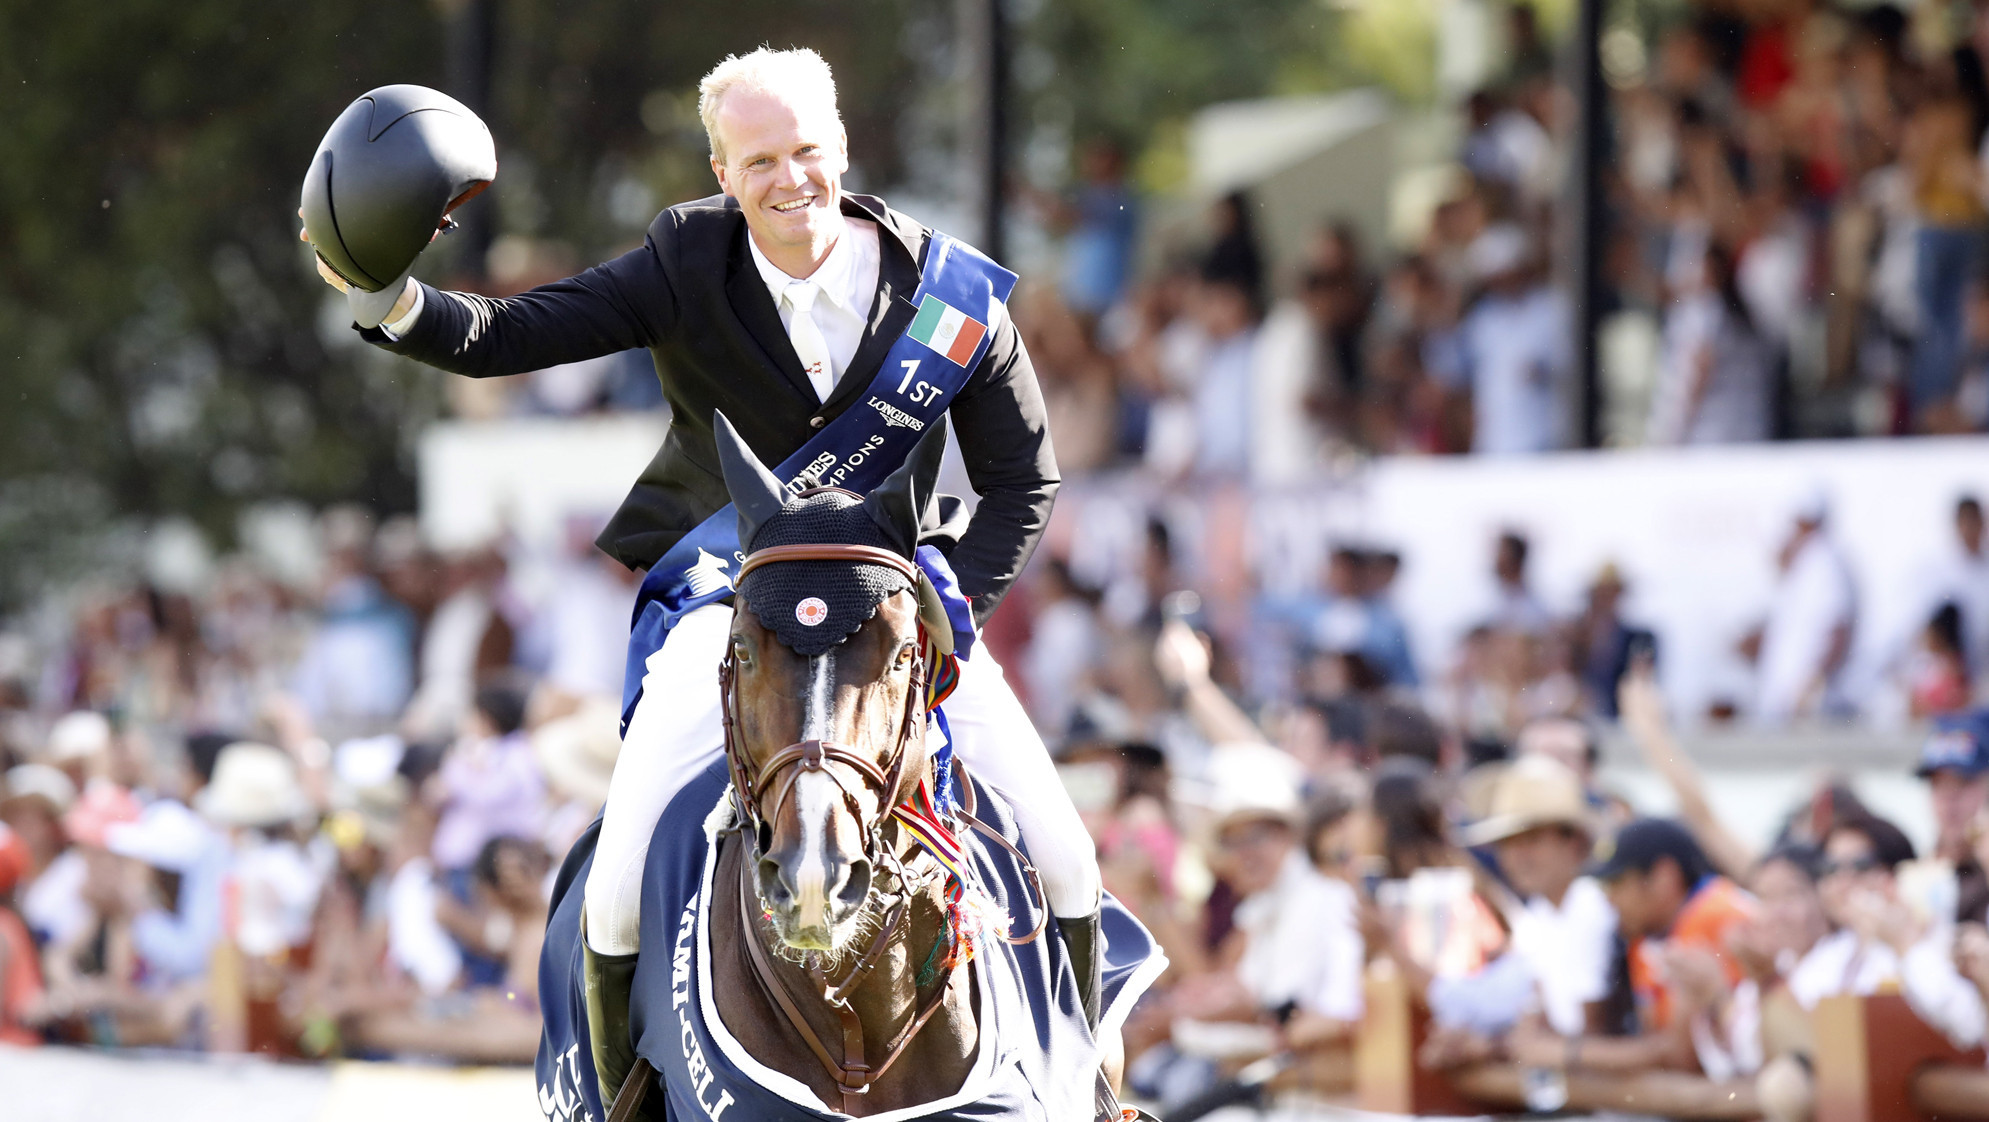 Belgium's Jérôme Guery won the LGCT in Mexico City ©LGCT